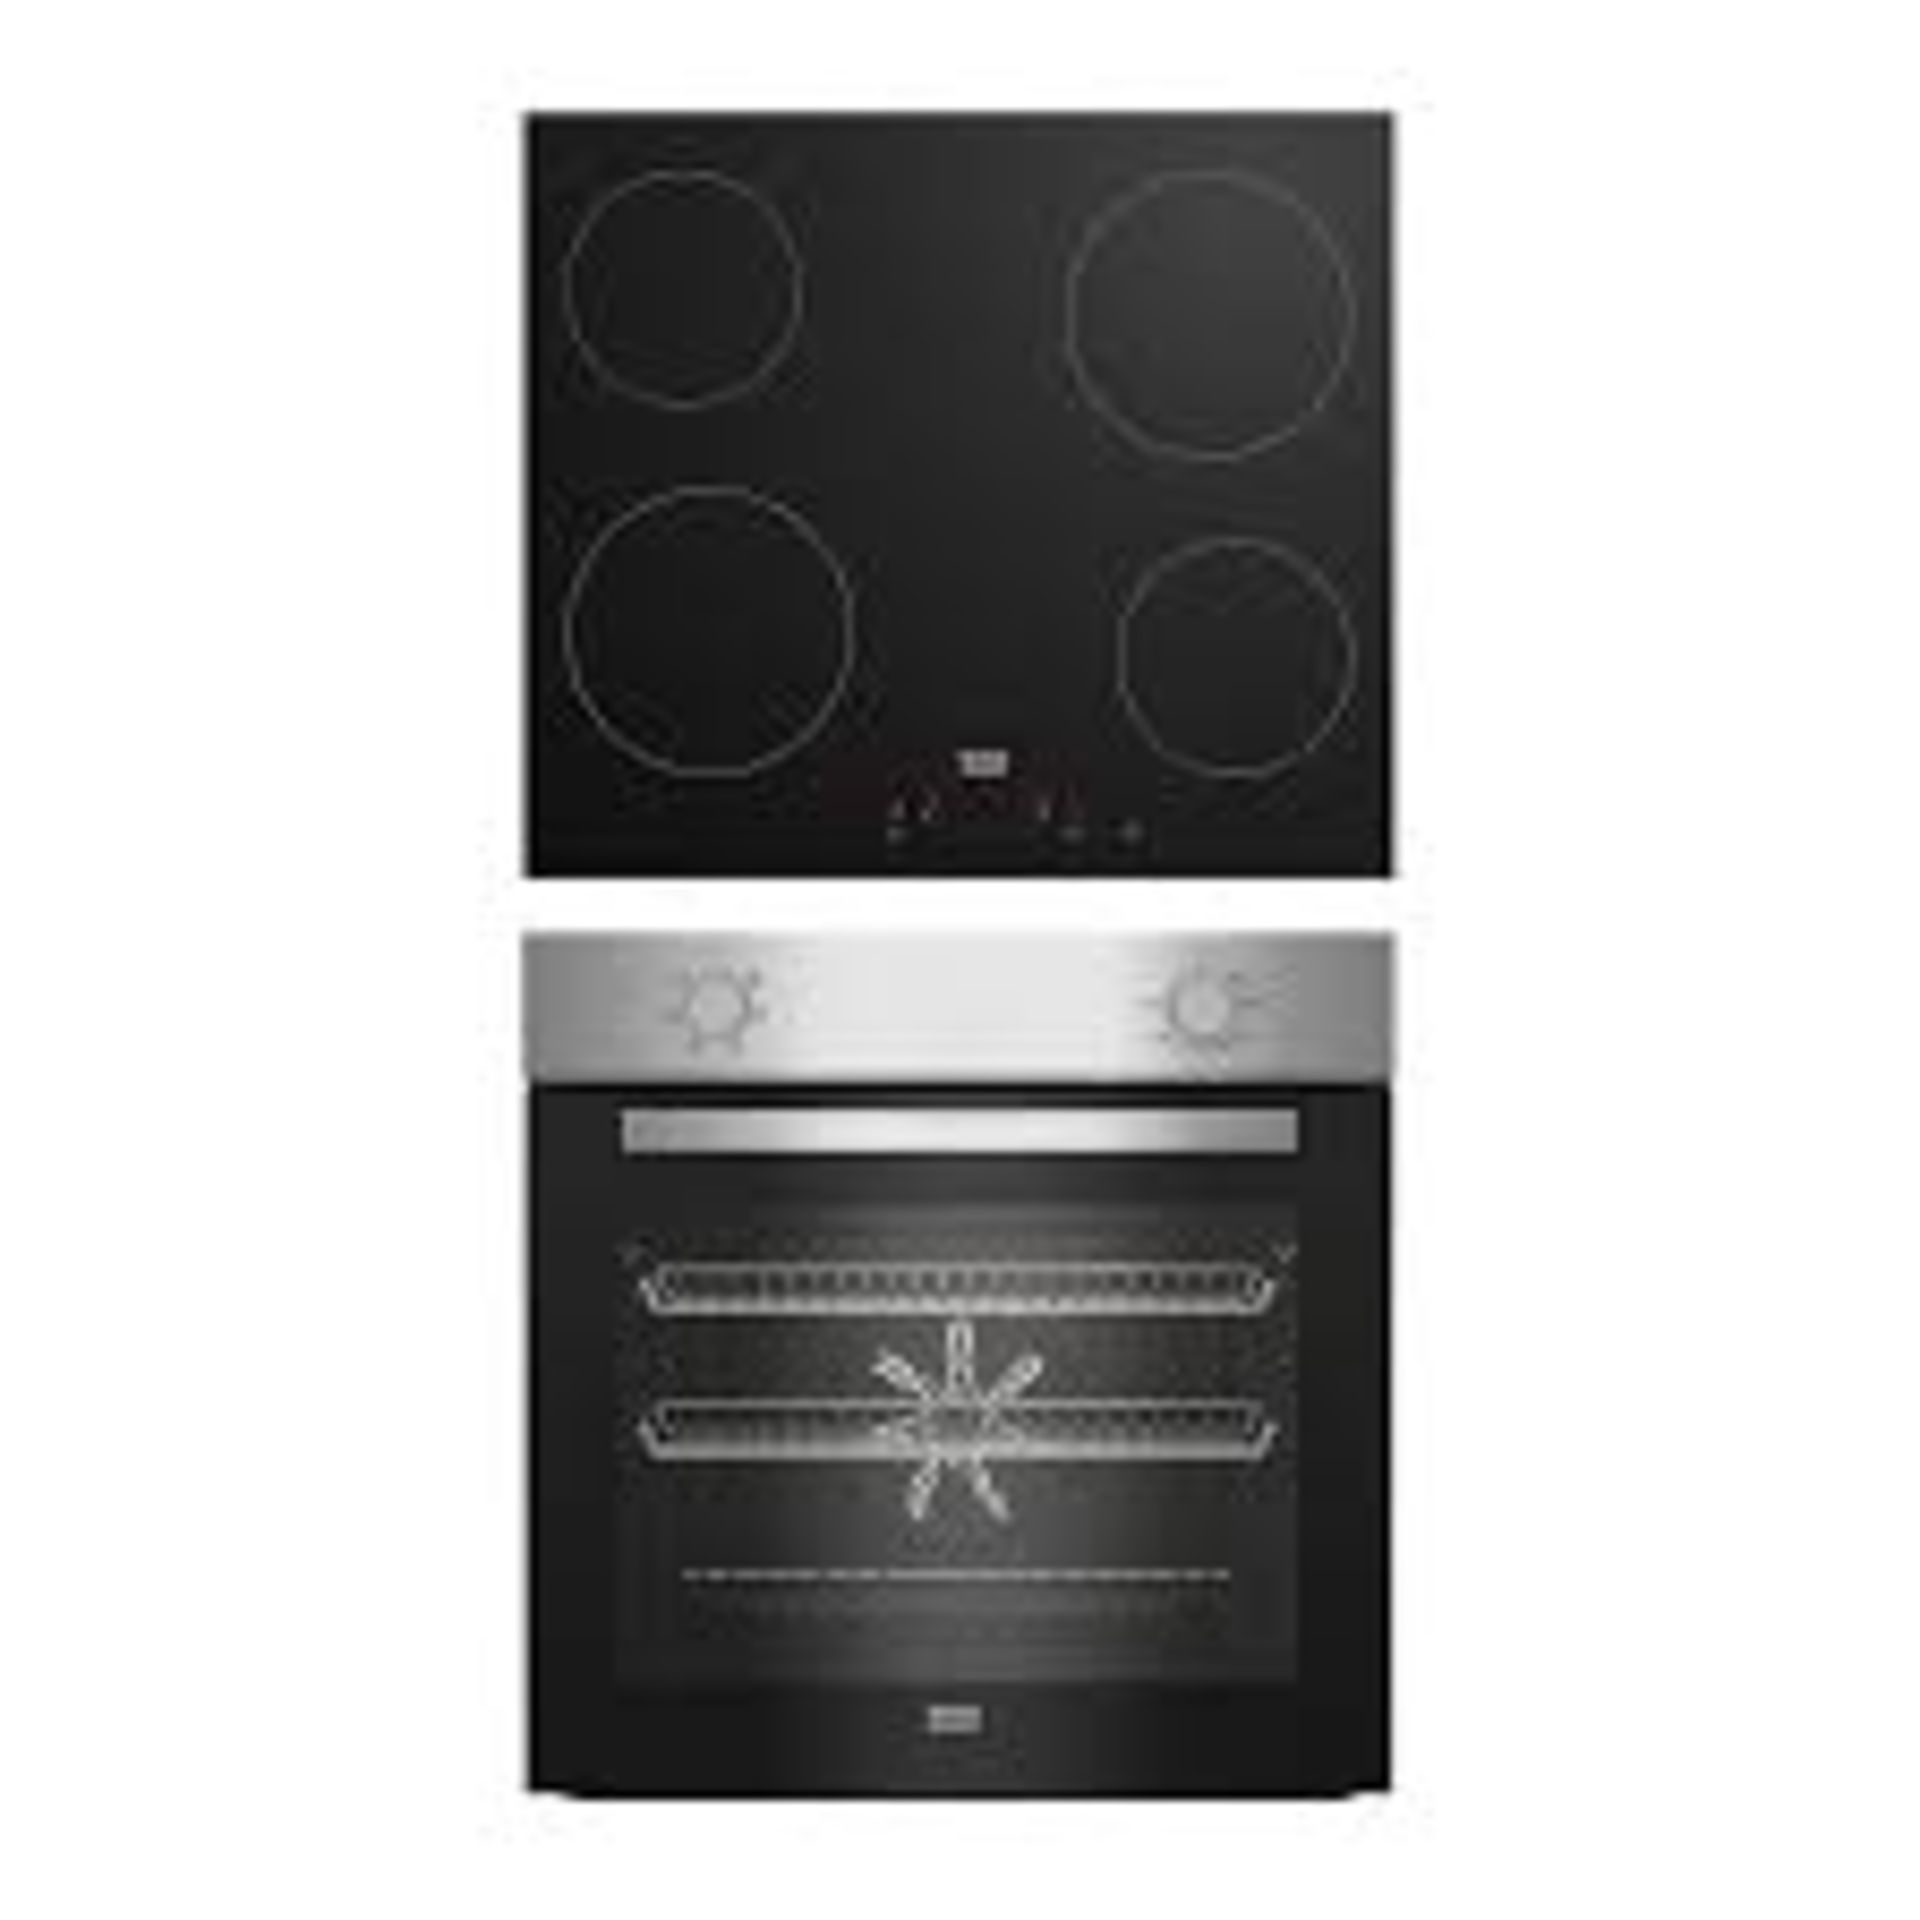 Beko QBSE222X Built-in Multifunction Oven & hob pack. - R19. Bake perfect cupcakes, roast a